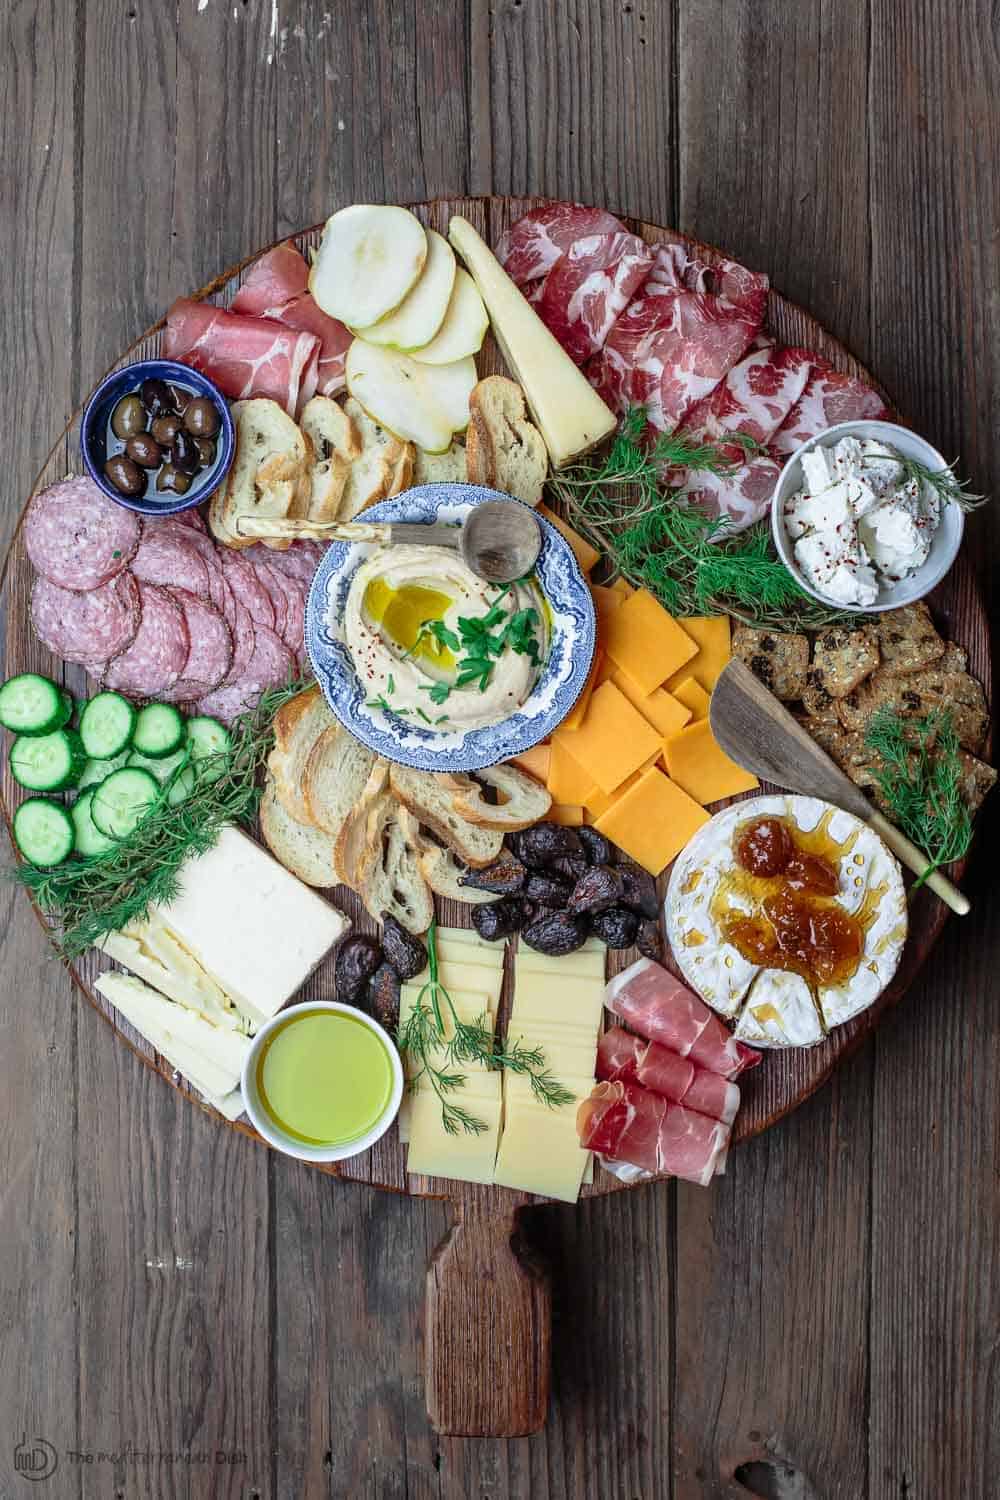 Best Cheese Board with assorted cheeses, cured meats, olives, cucumbers, and dried fruits